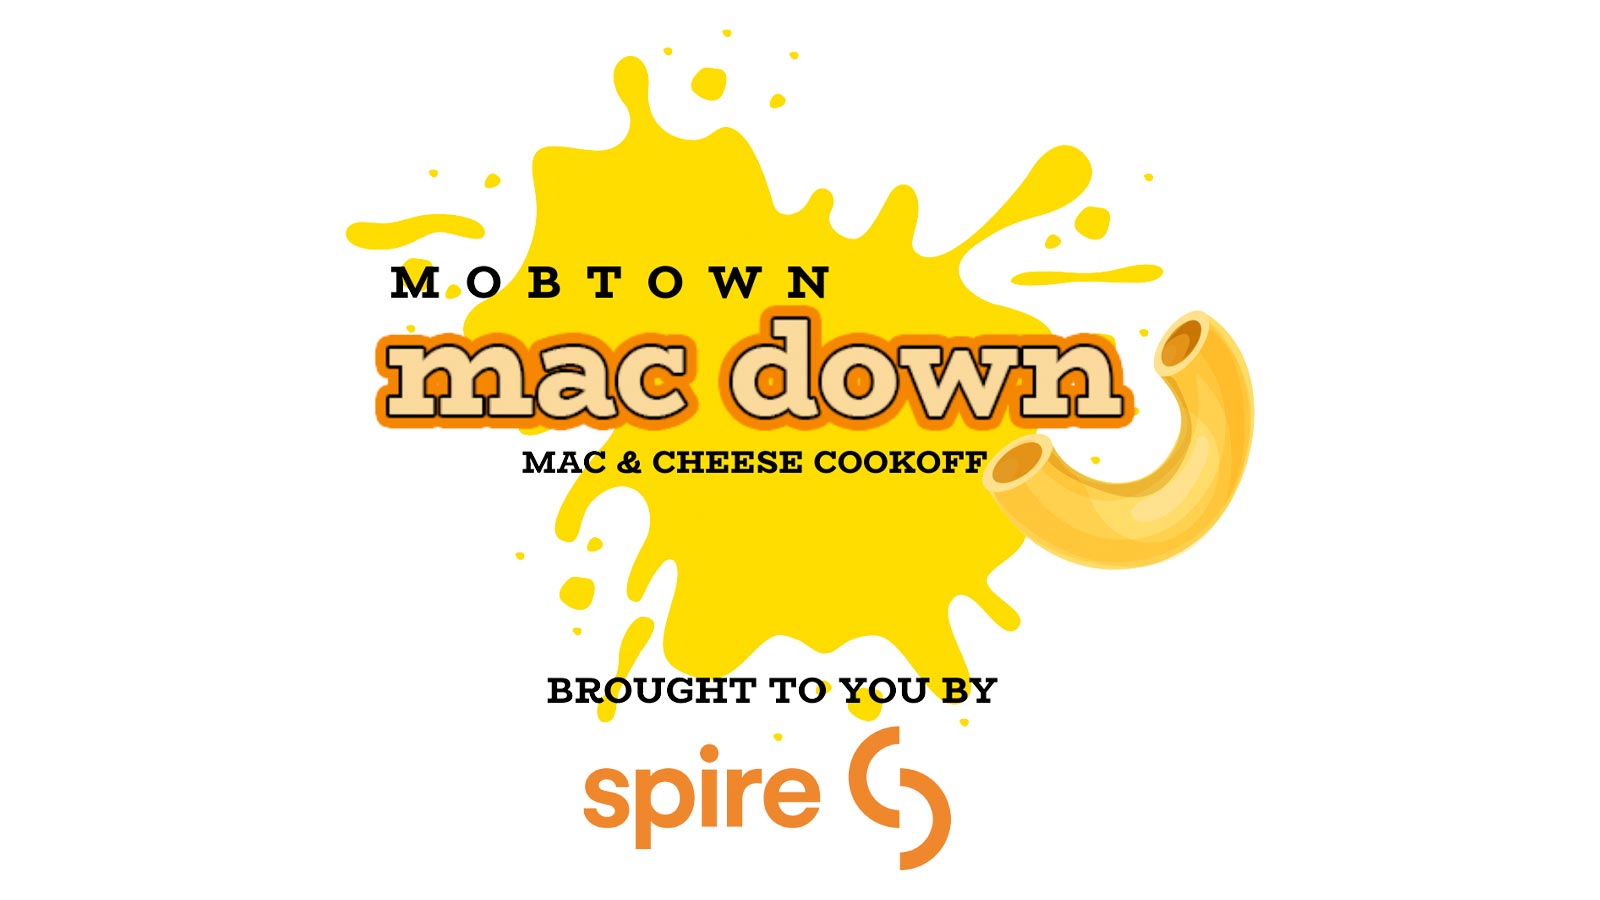 Mobtown Mac Down To Benefit The Cookery Project